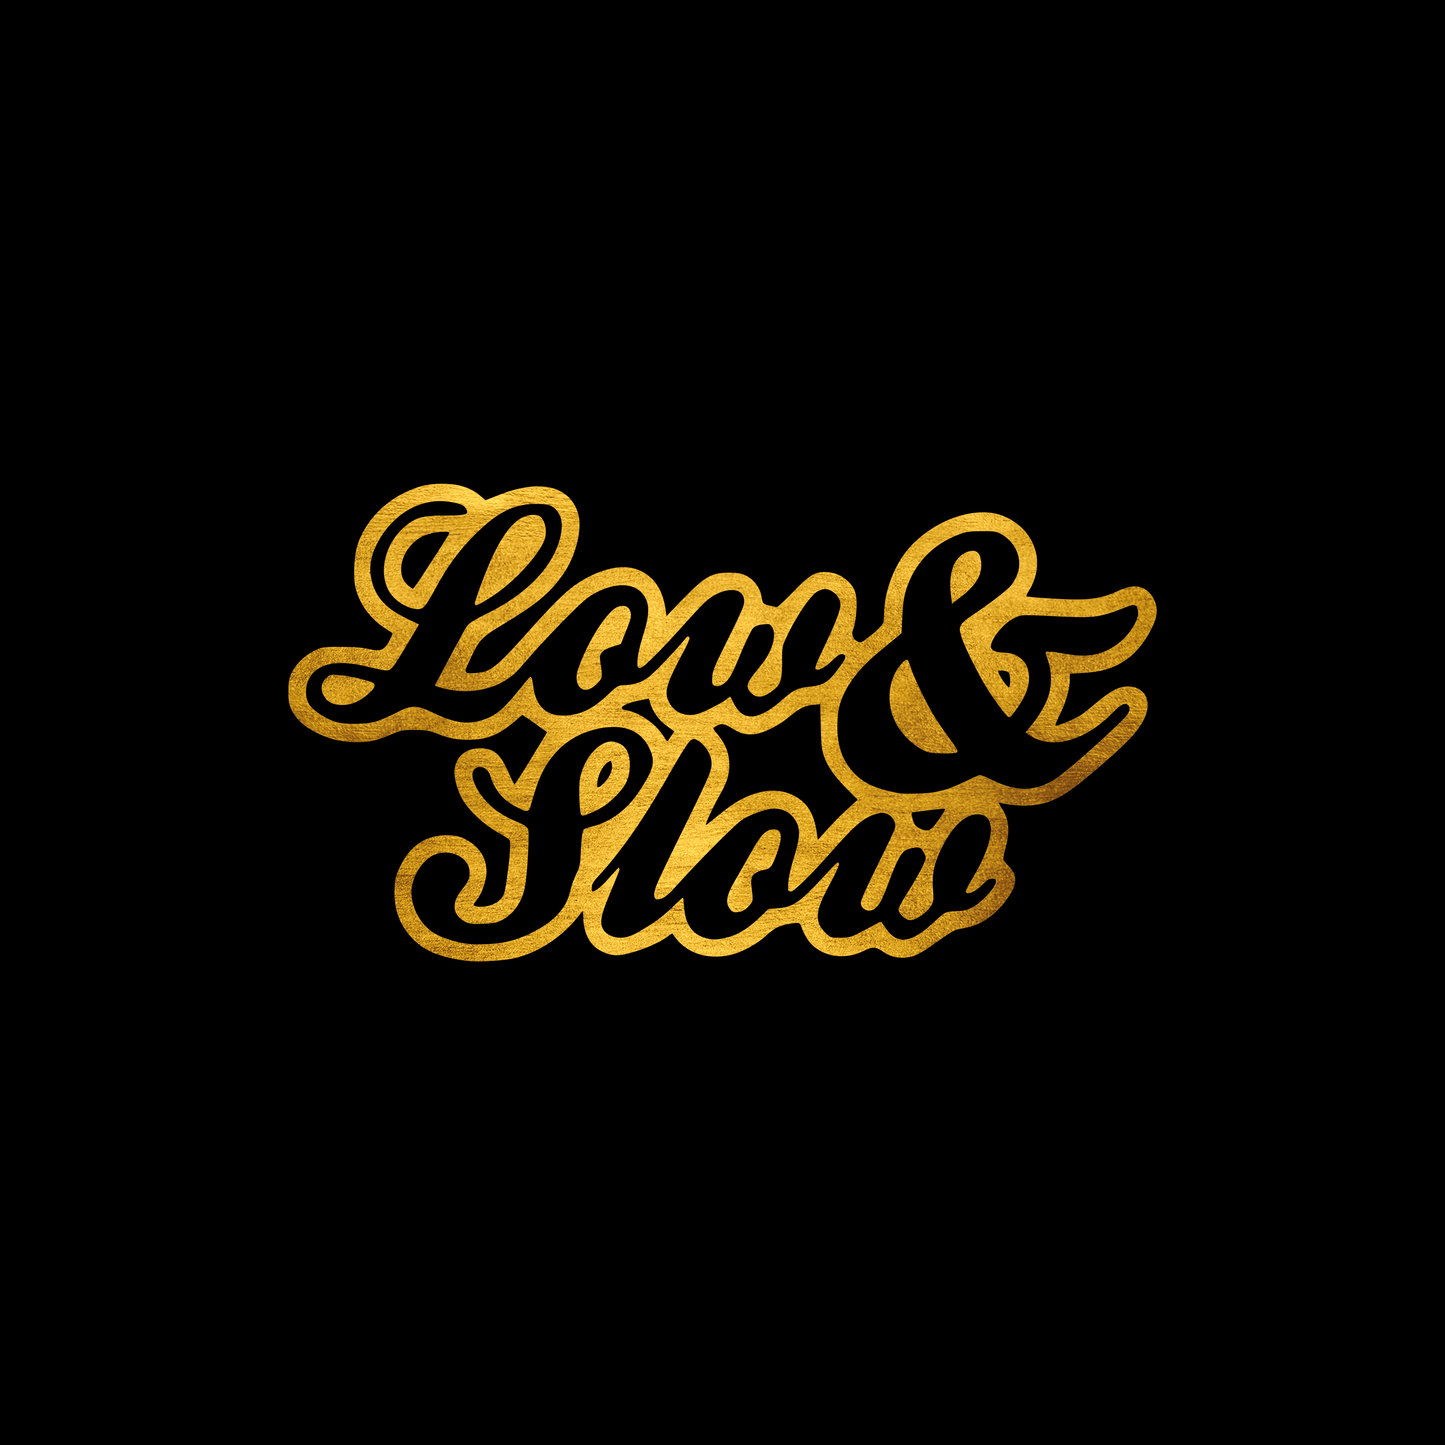 Low and slow sticker decal